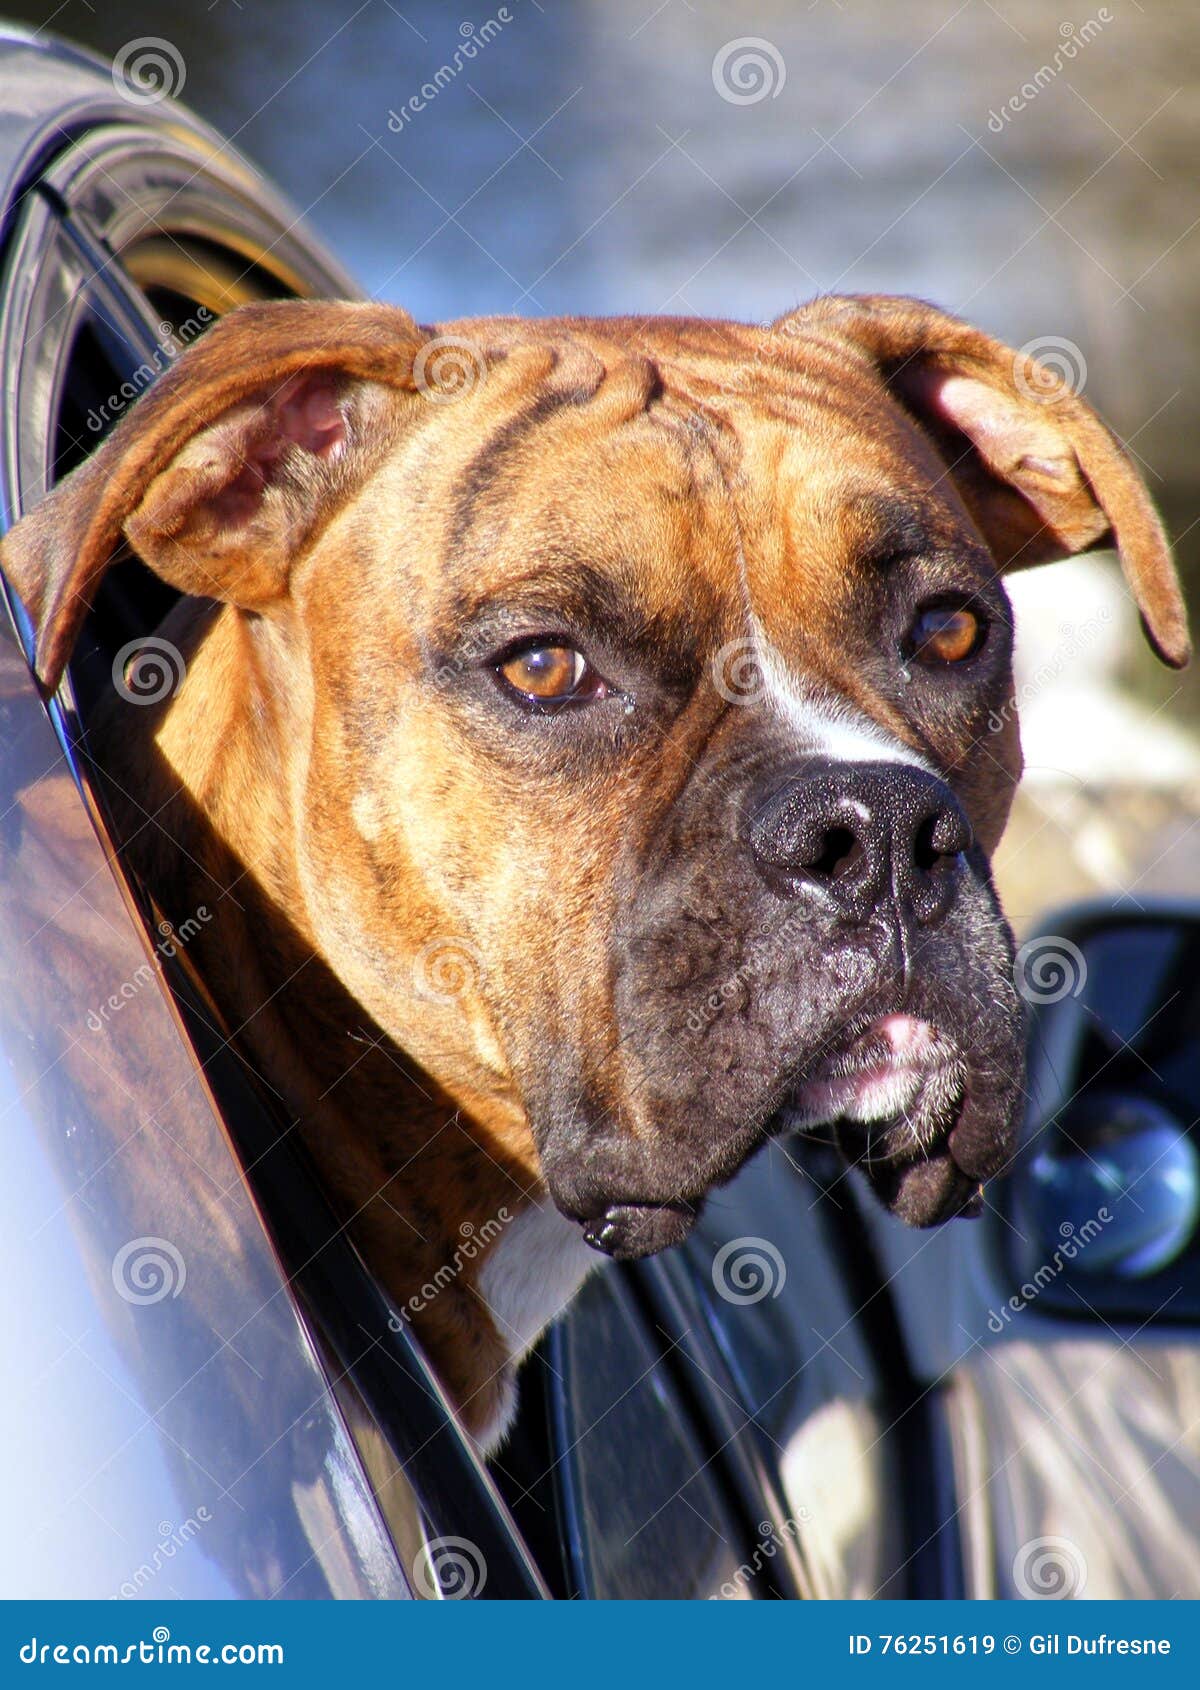 Dog Boxer Looking Out Of Car Window Stock Image Image of dogs, serious 76251619